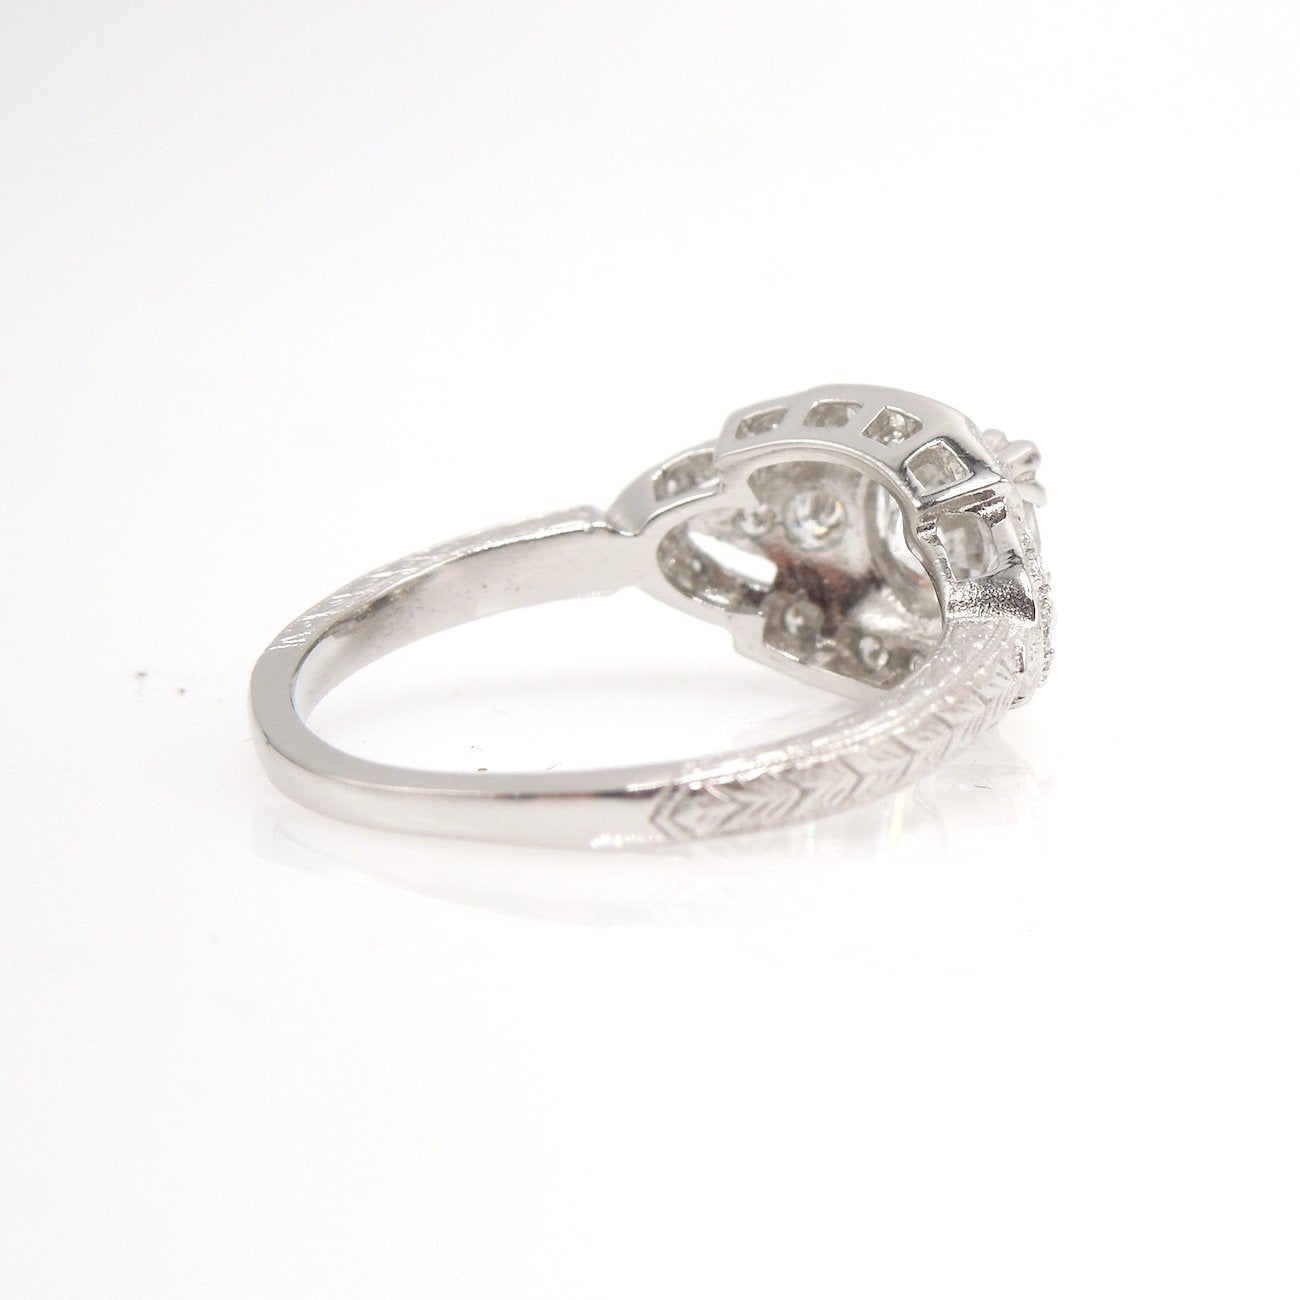 The Eye Ring - 0.90ct Diamond - Art Deco Style Engagement Ring in Platinum